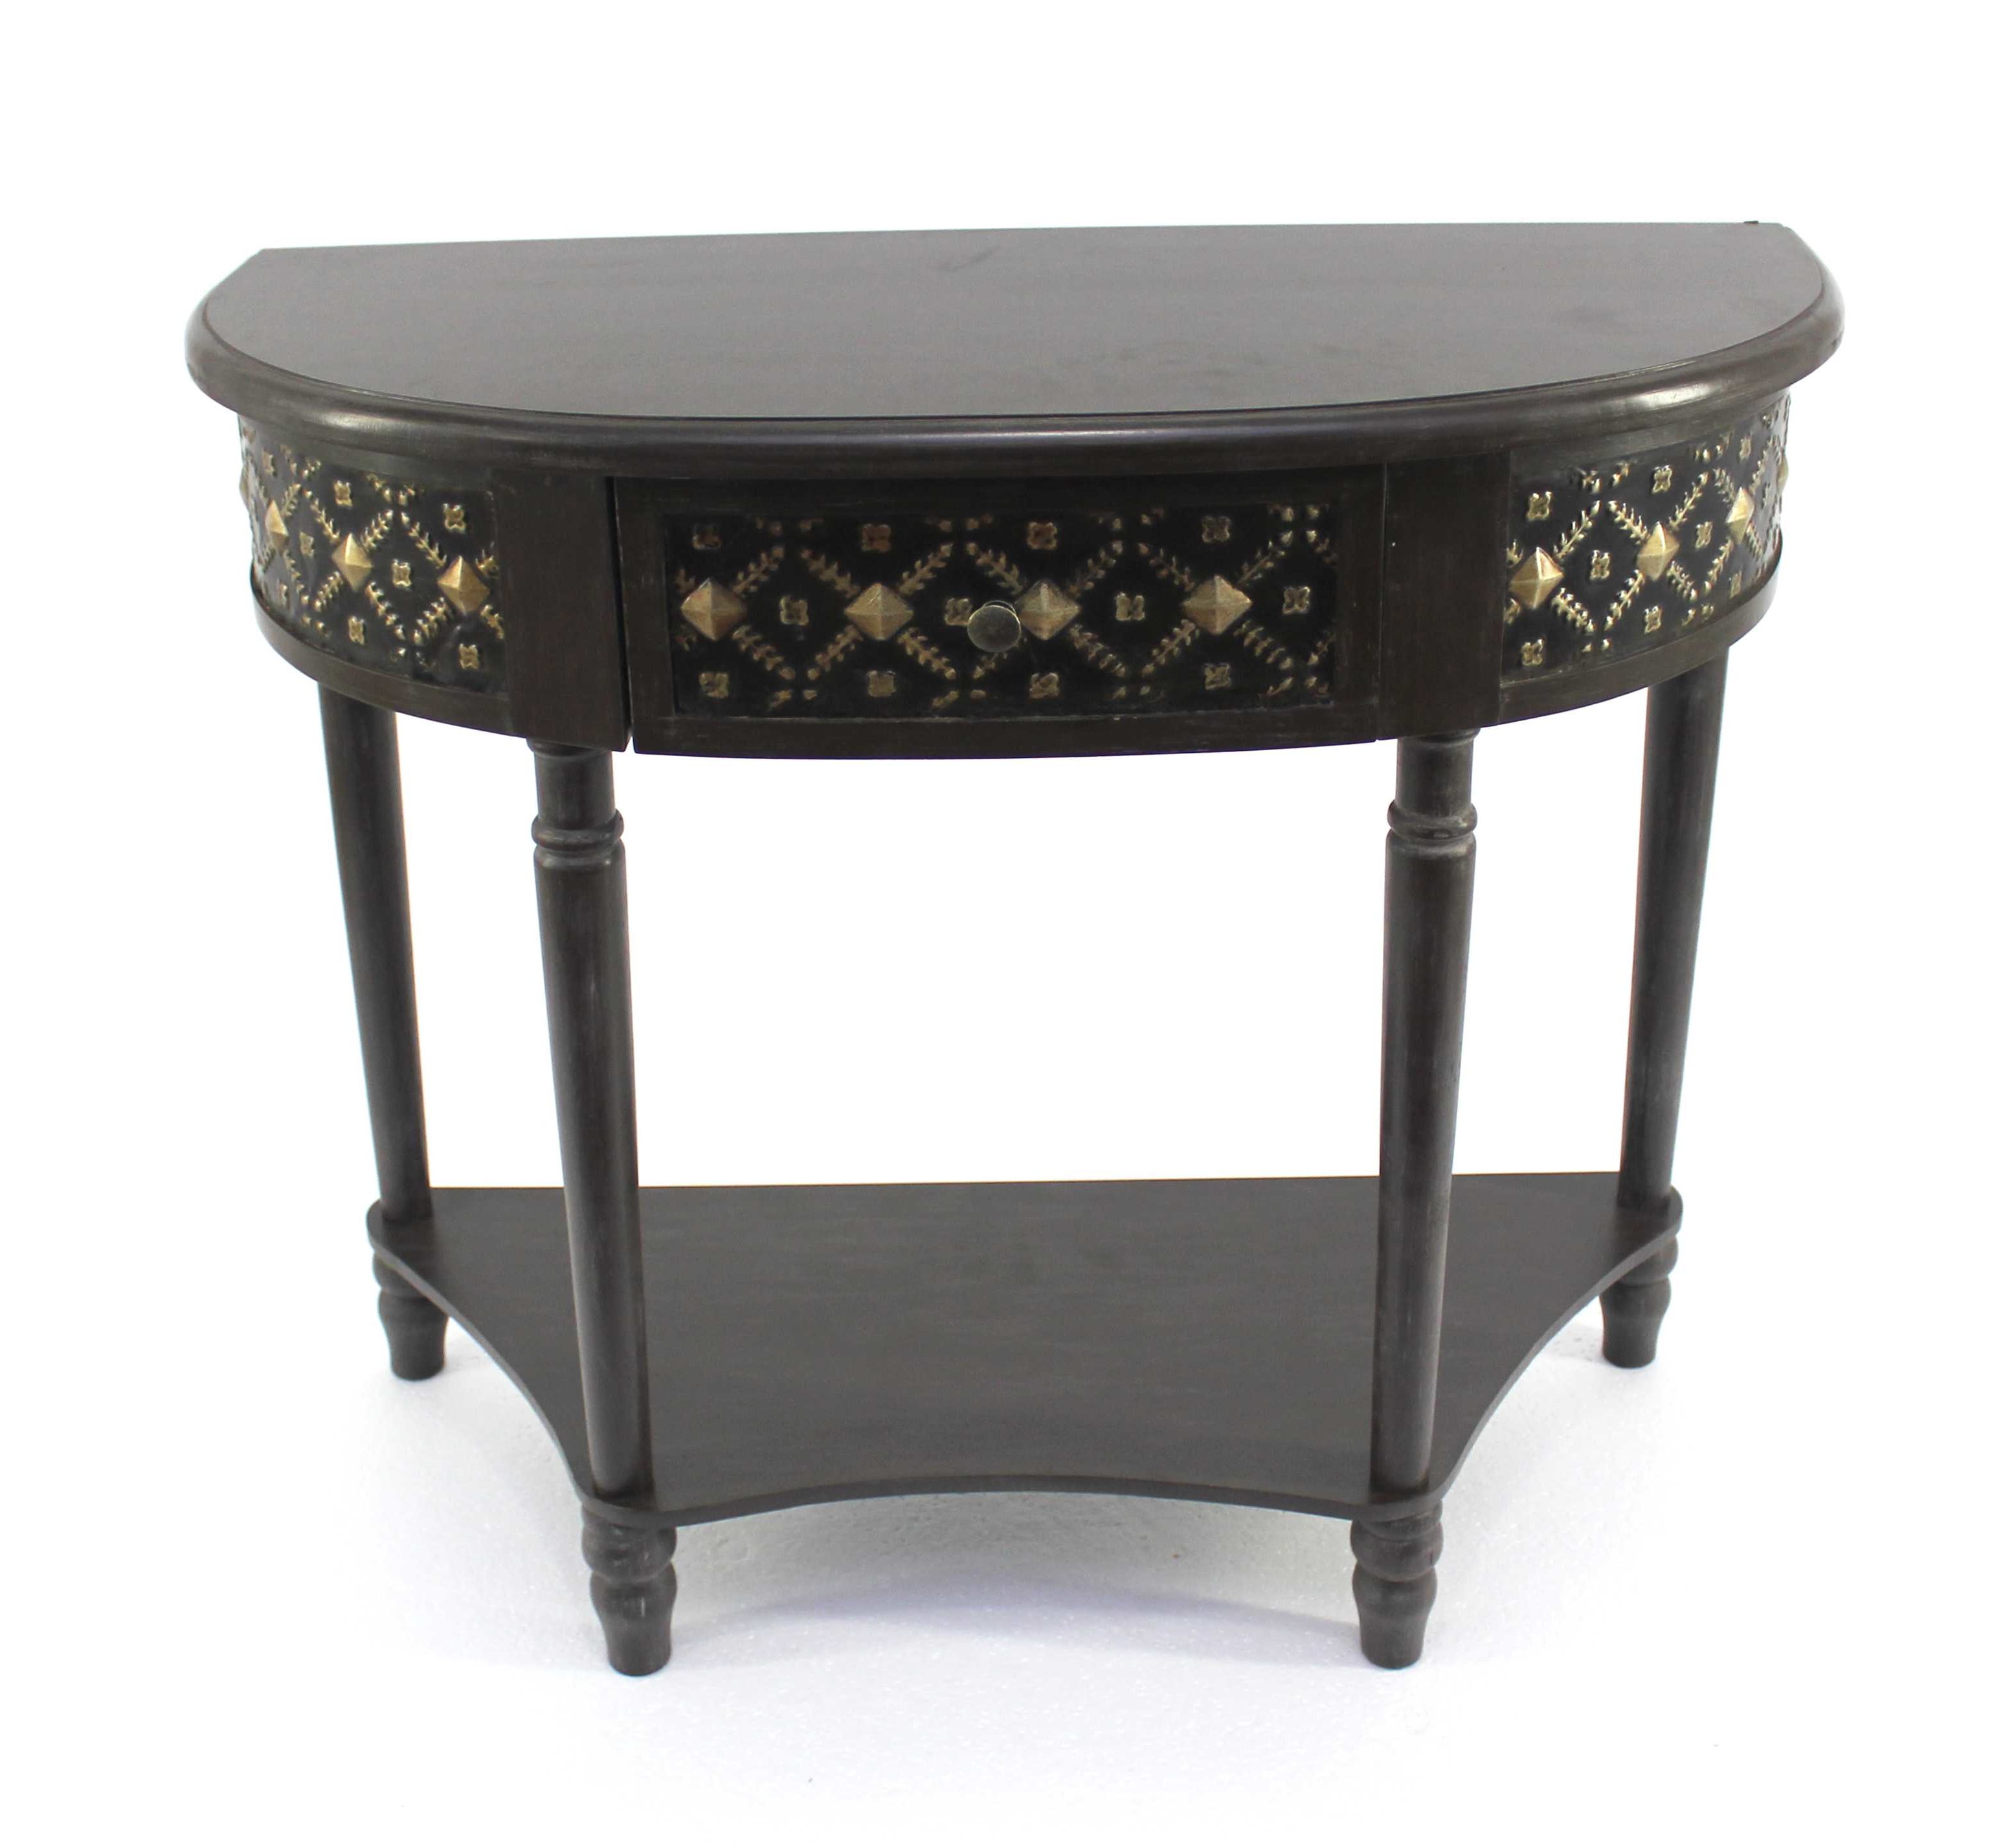 half moon accent table fuentes console black movable kitchen island jofran end room essentials mirror runner quilt patterns piece bistro set beige tablecloth marble nest tables